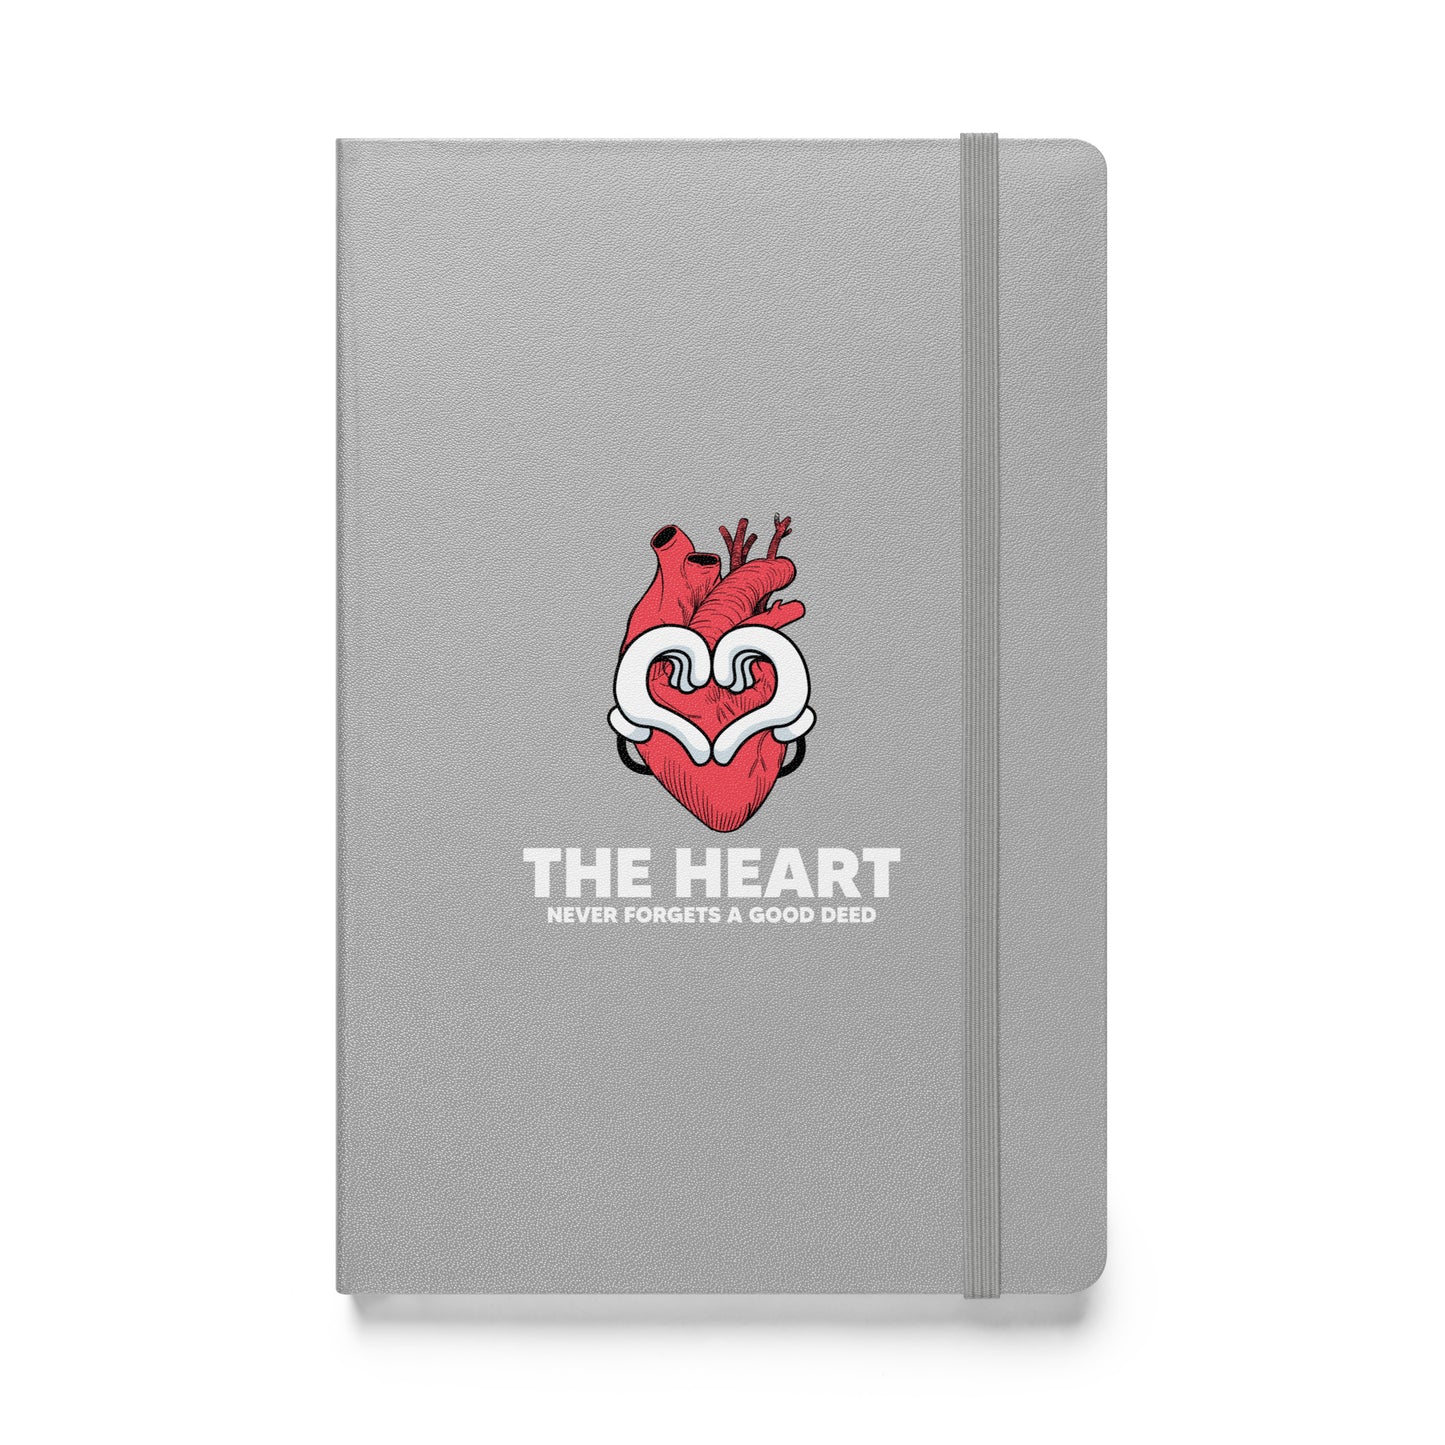 The Heart Never Forgets A Good Deed Hardcover bound notebook